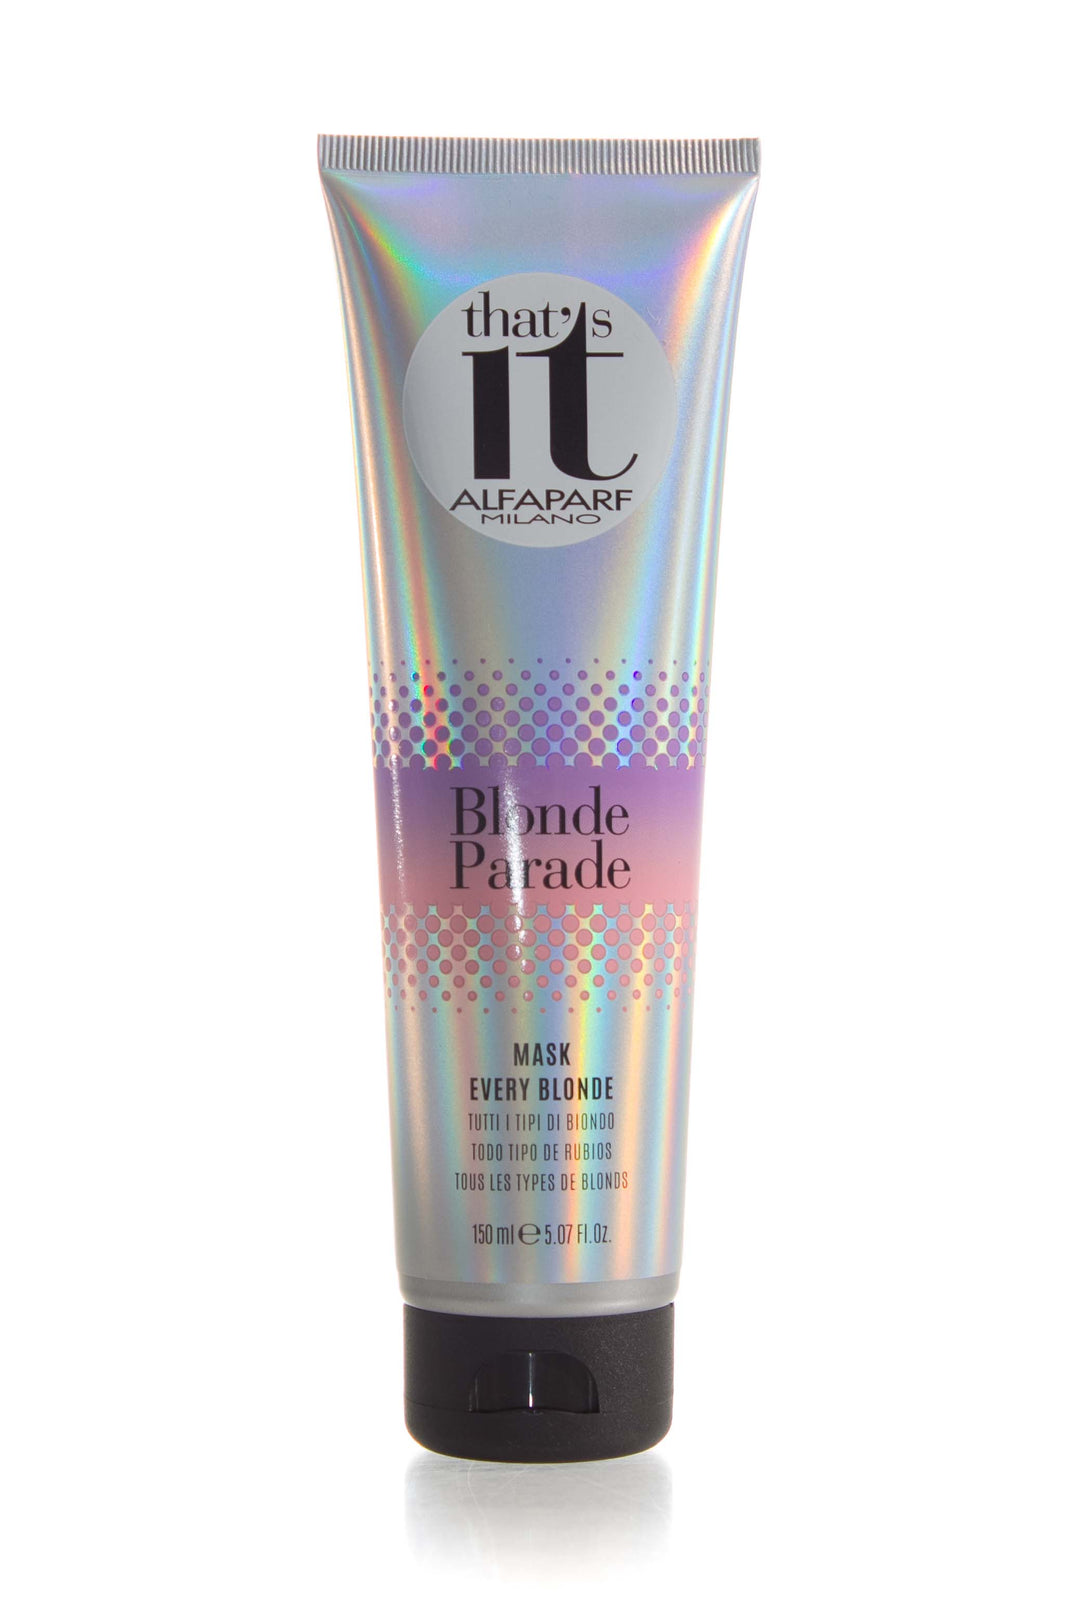 alfaparf-milano-that's-it-blonde-parade-mask-every-blonde-150ml